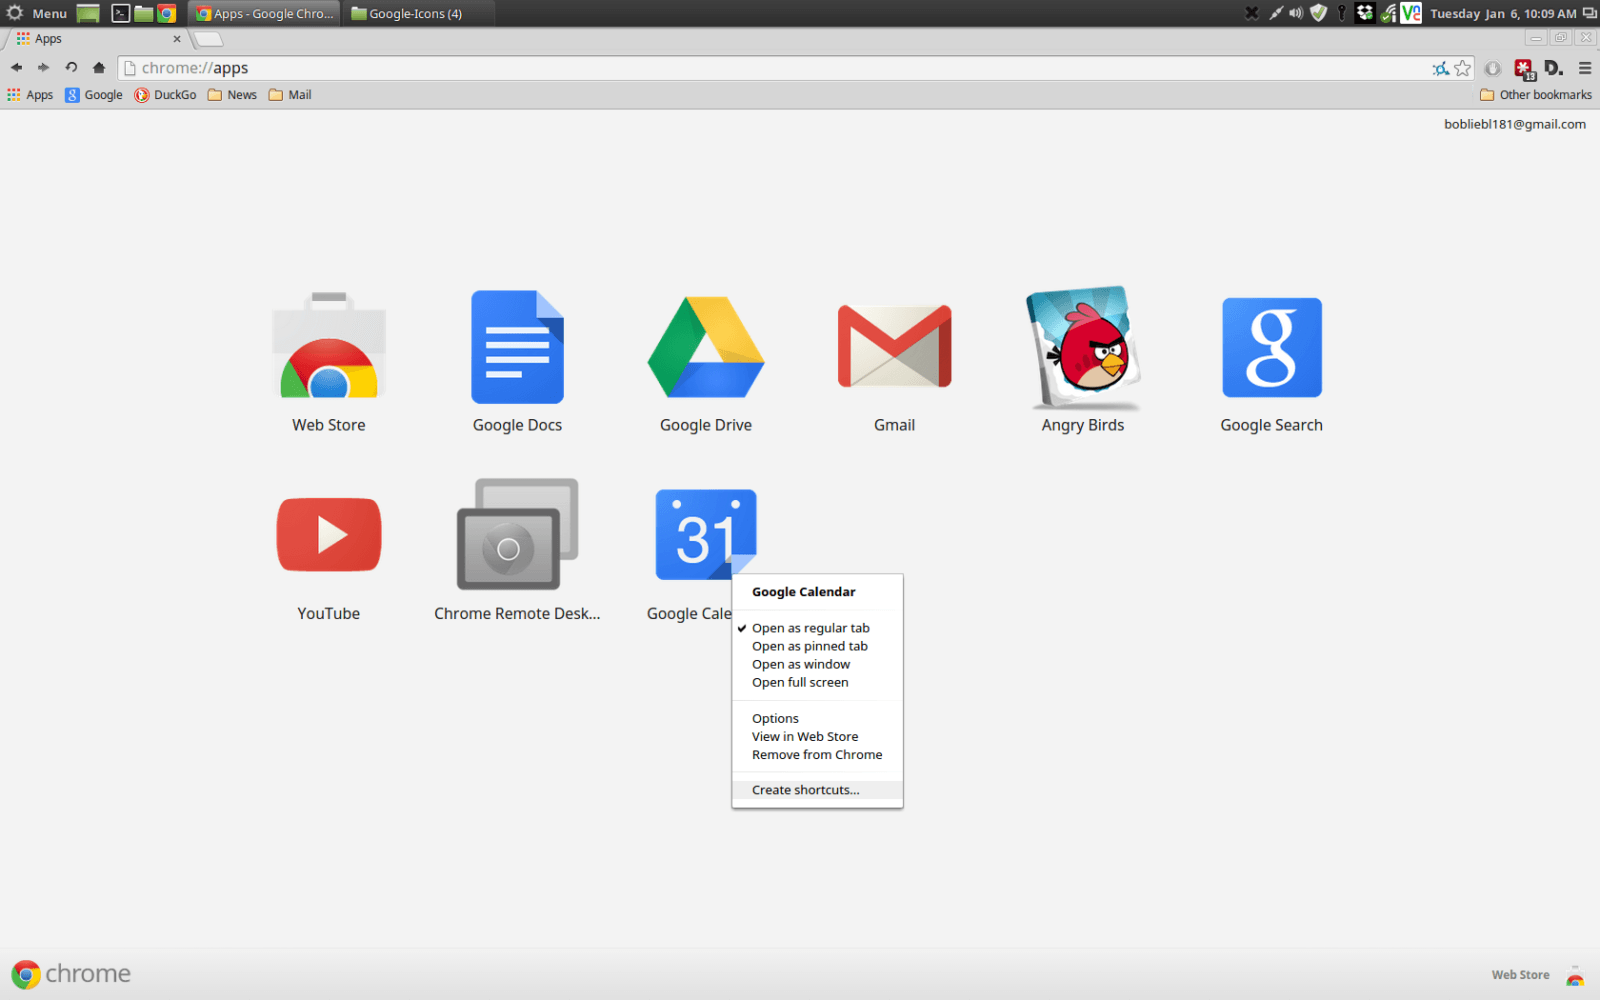 how to put the gmail icon on my desktop for firefox 61.0.2